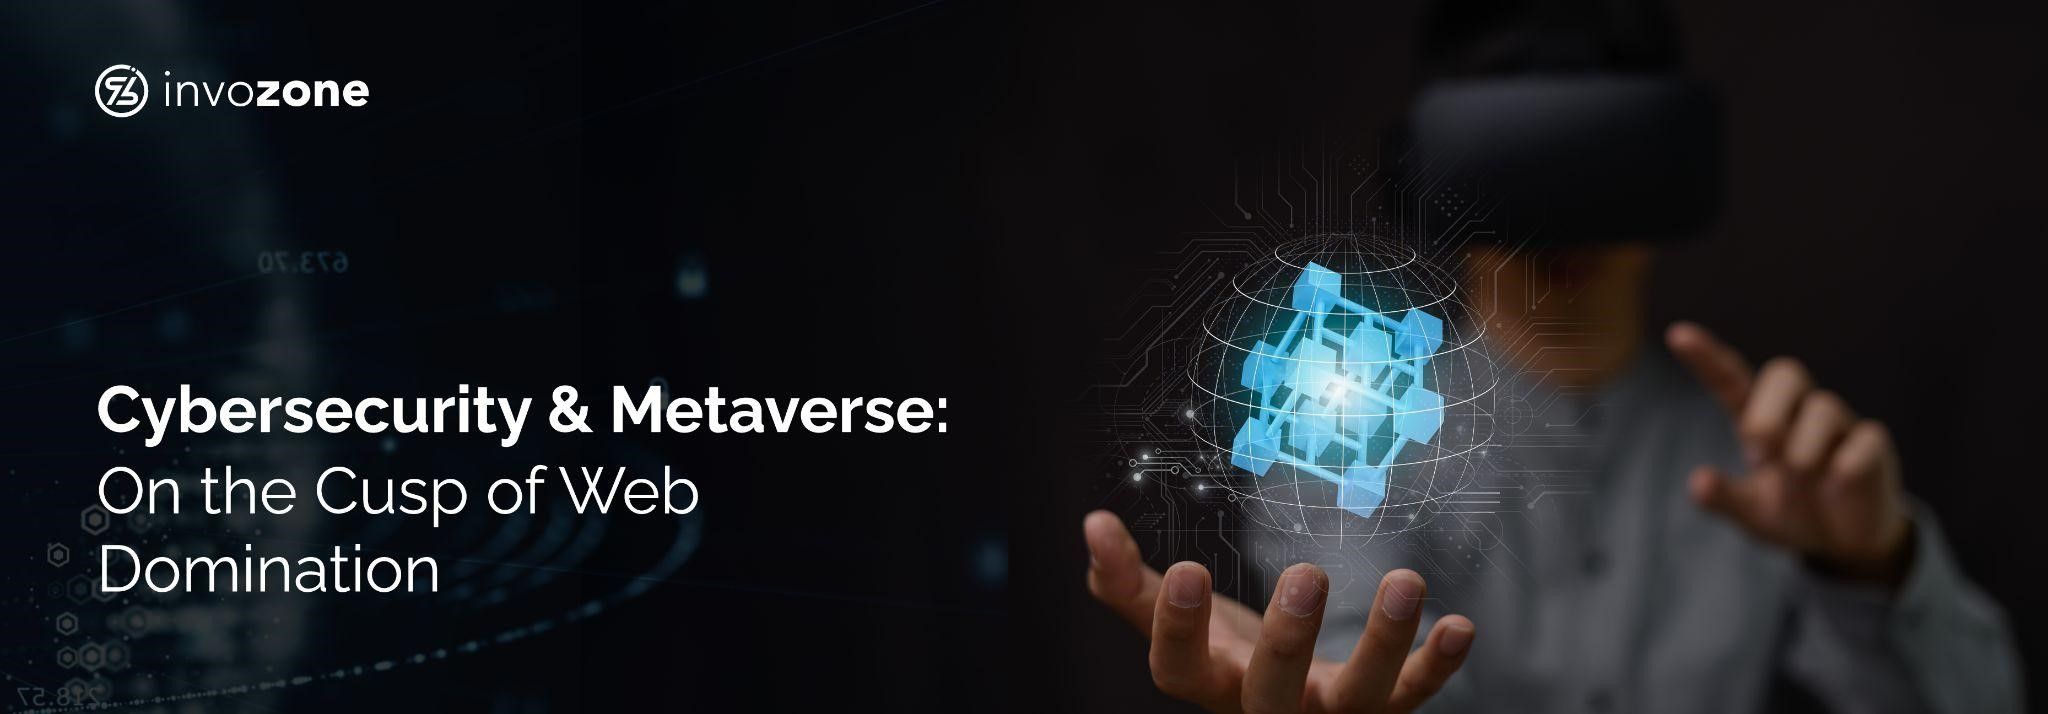 cybersecurity and metaverse web domination featured image